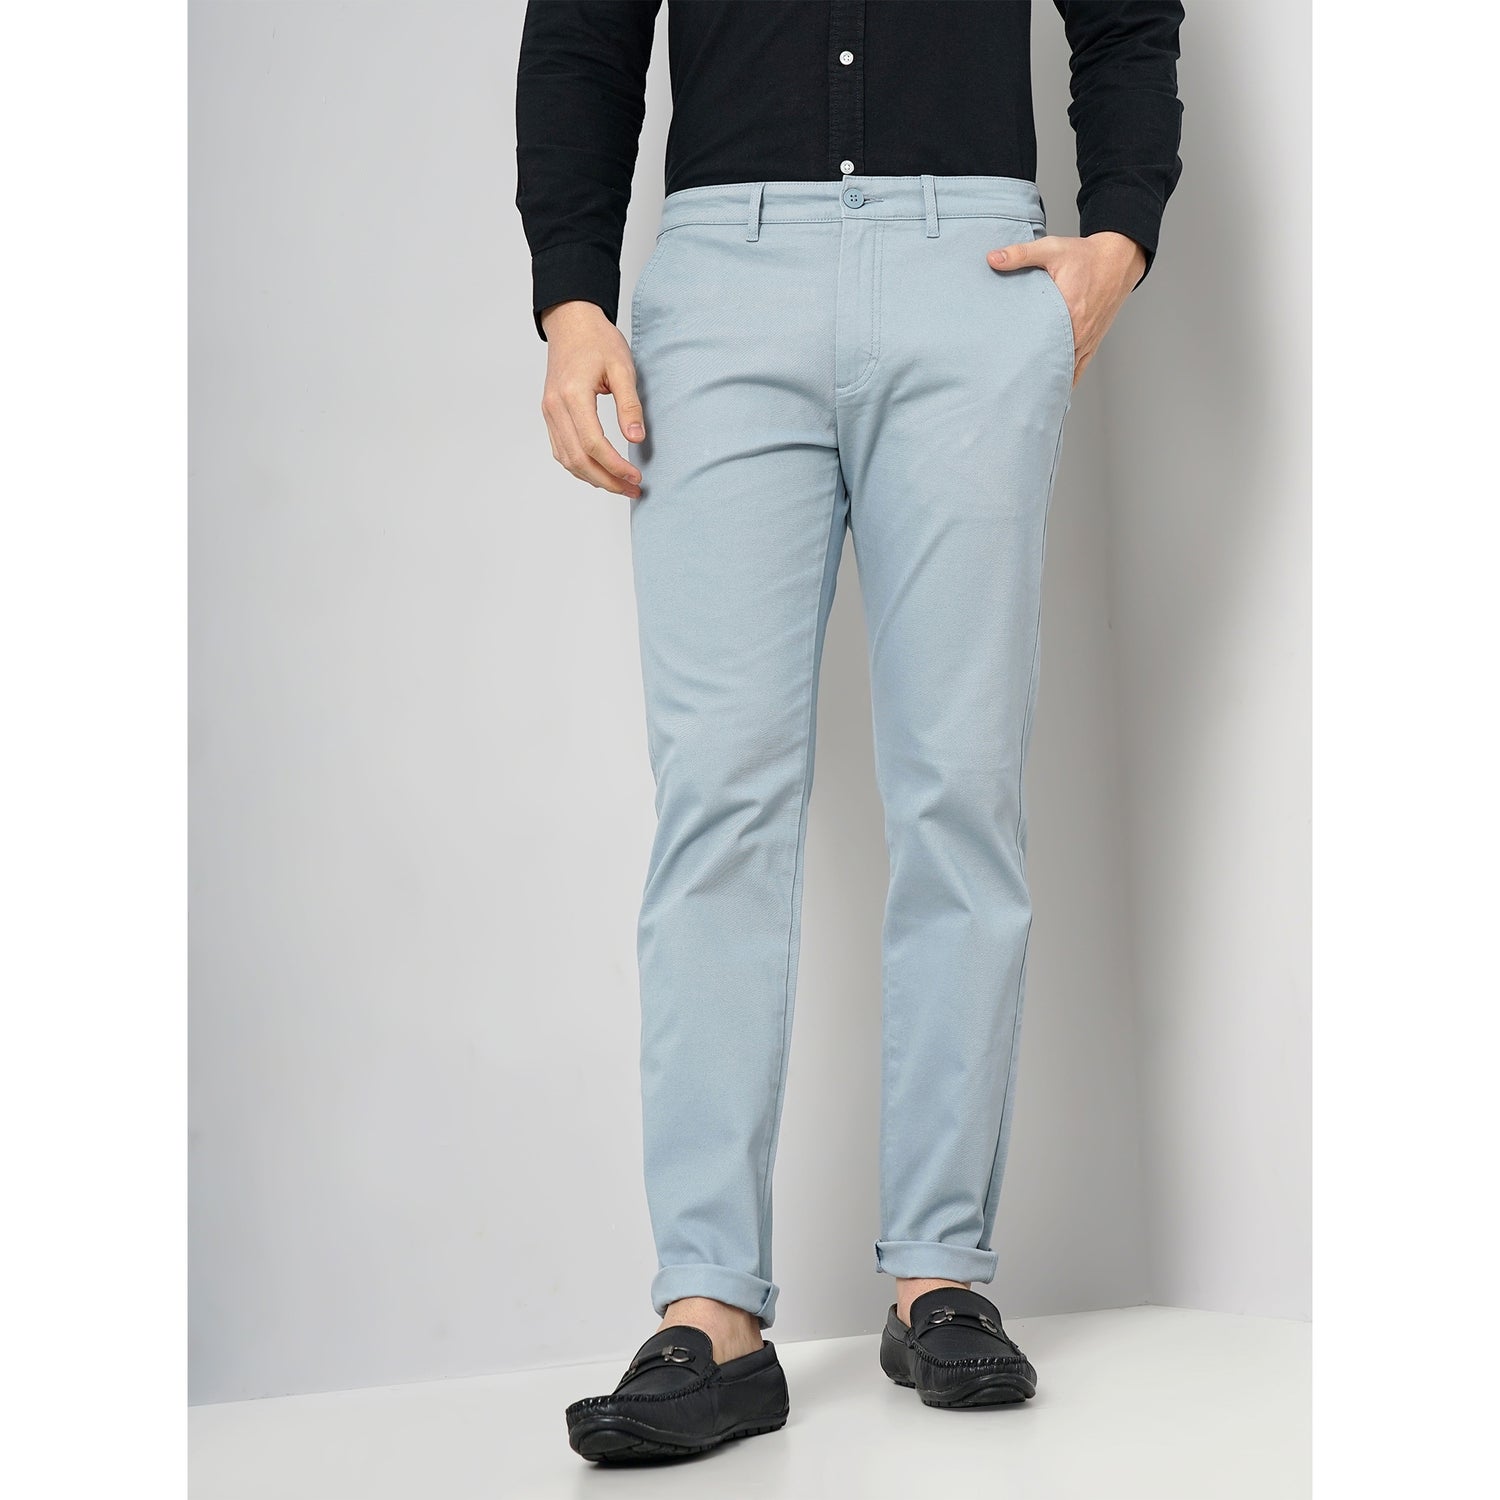 Men Blue Solid Slim Fit Cotton Basic Chinos Casual Trousers (TOCHARLES2)